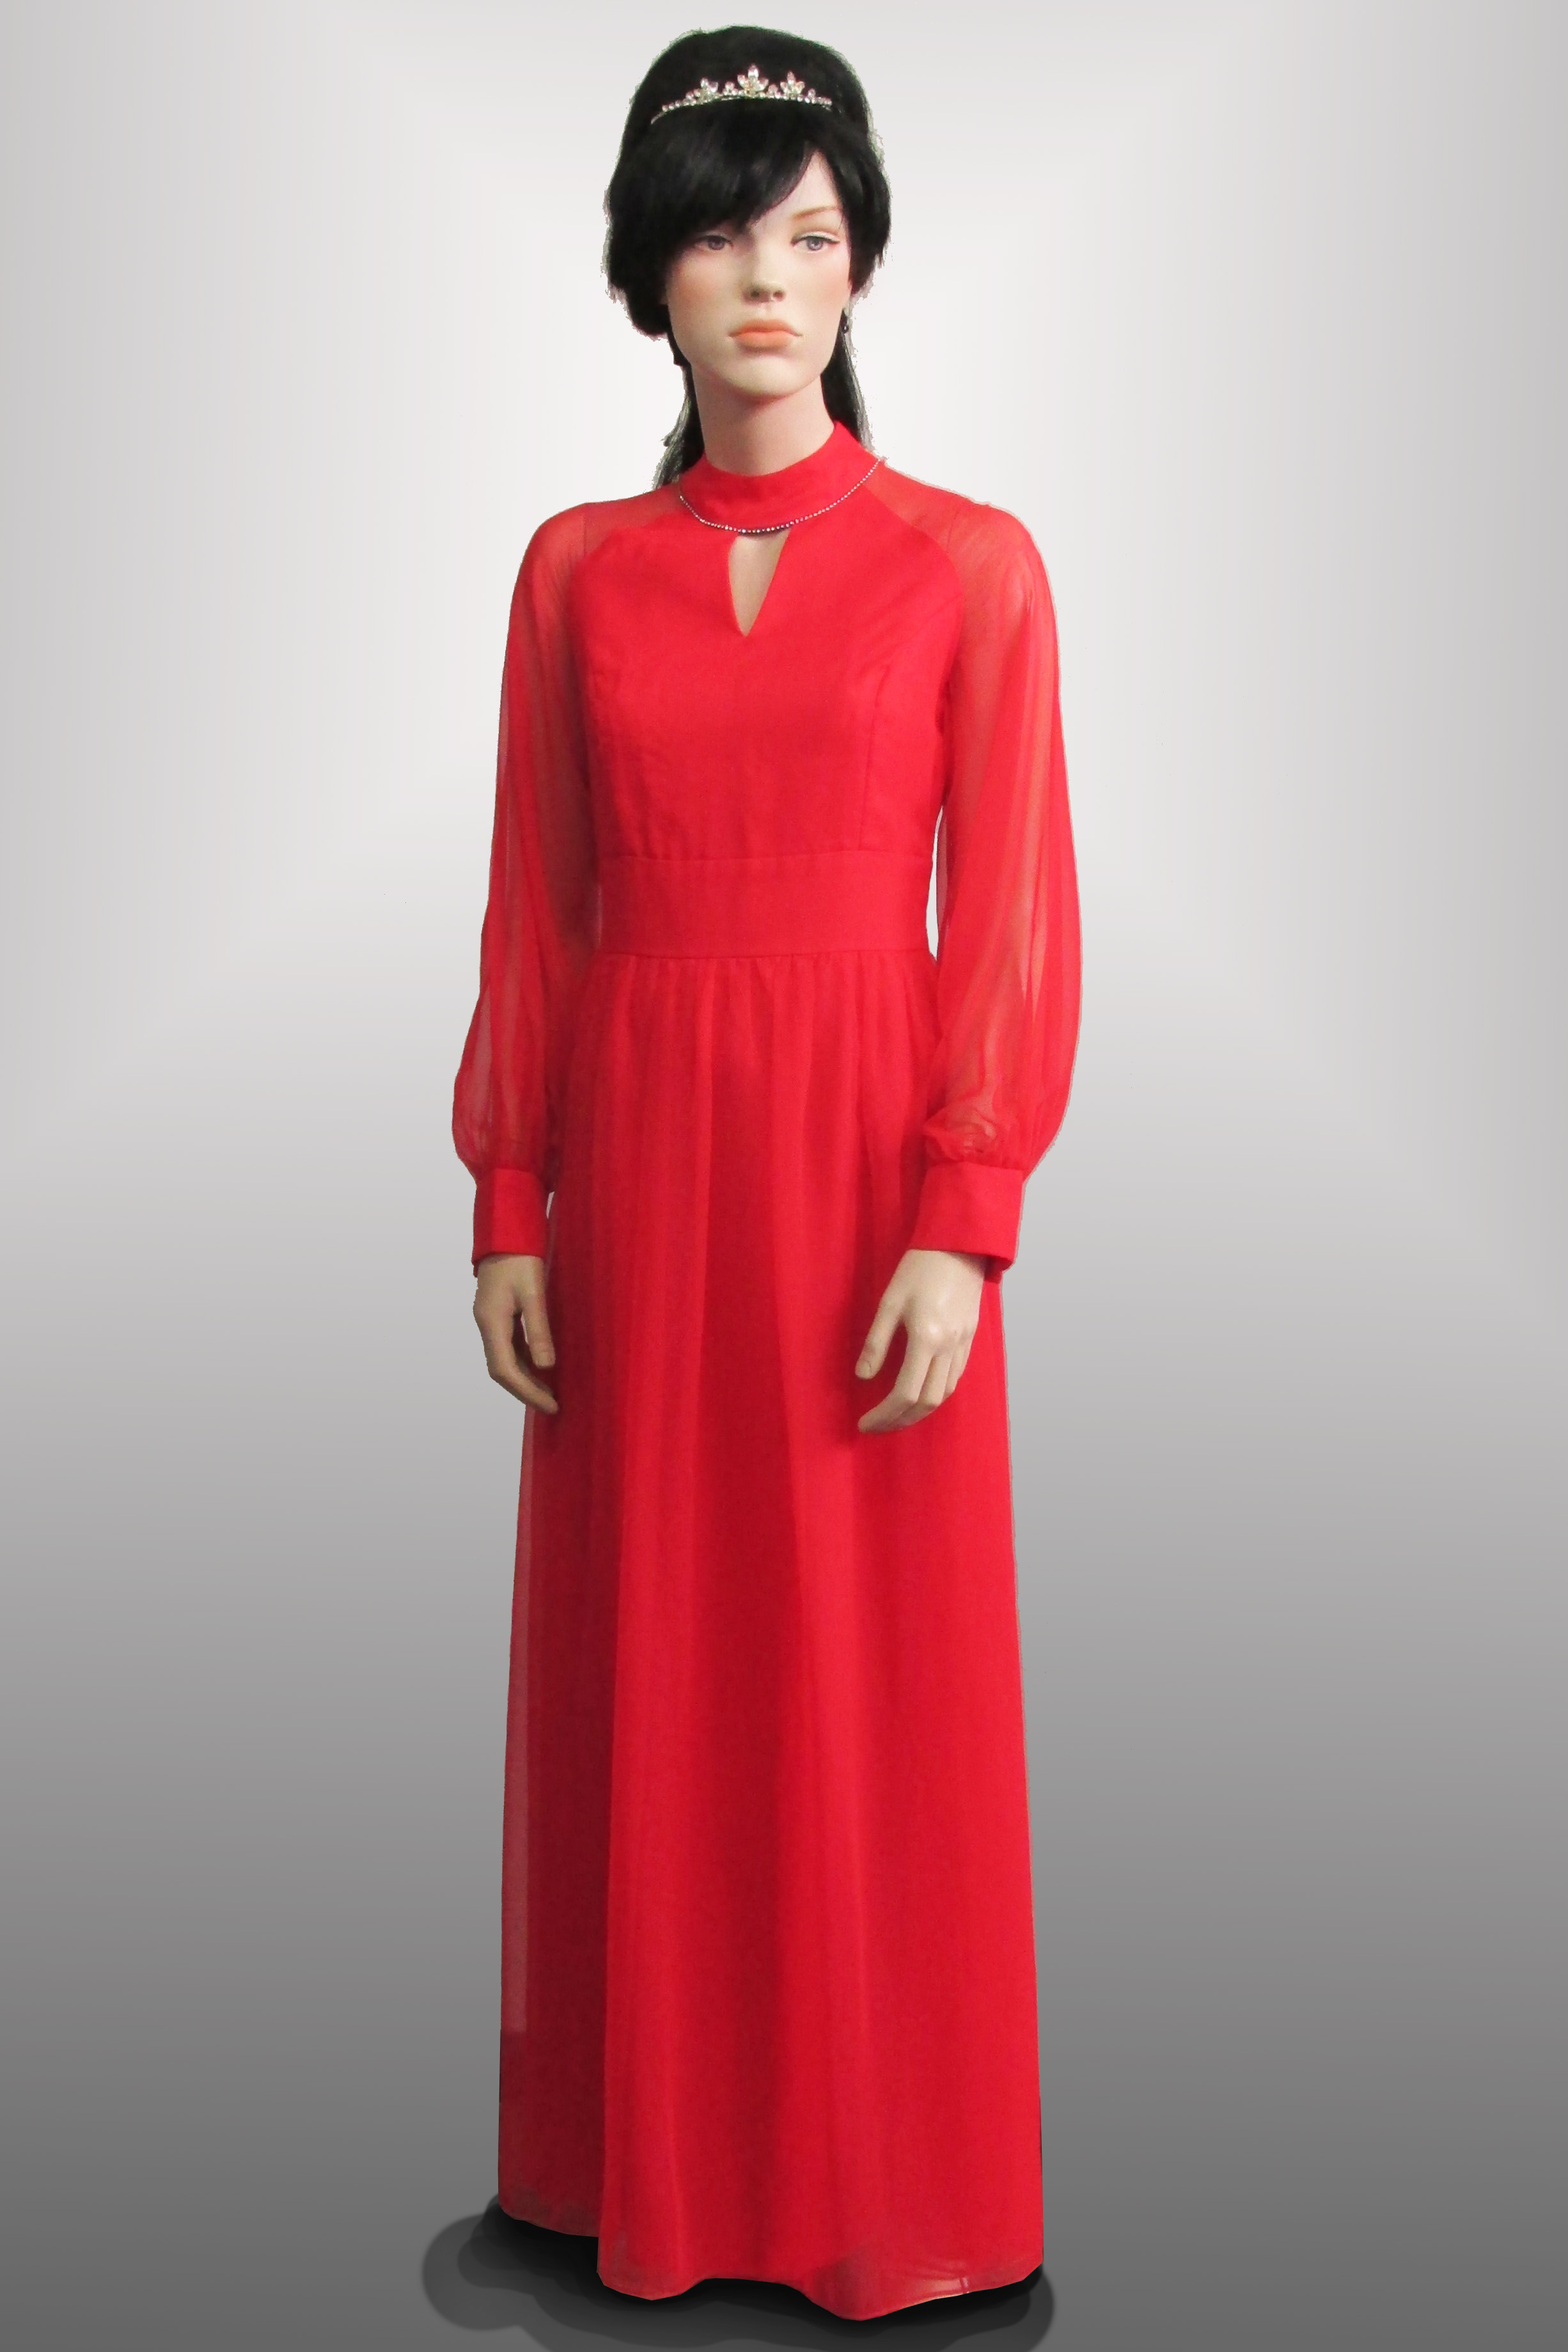 Evening Gown Red with Sheer Sleeves 1960s